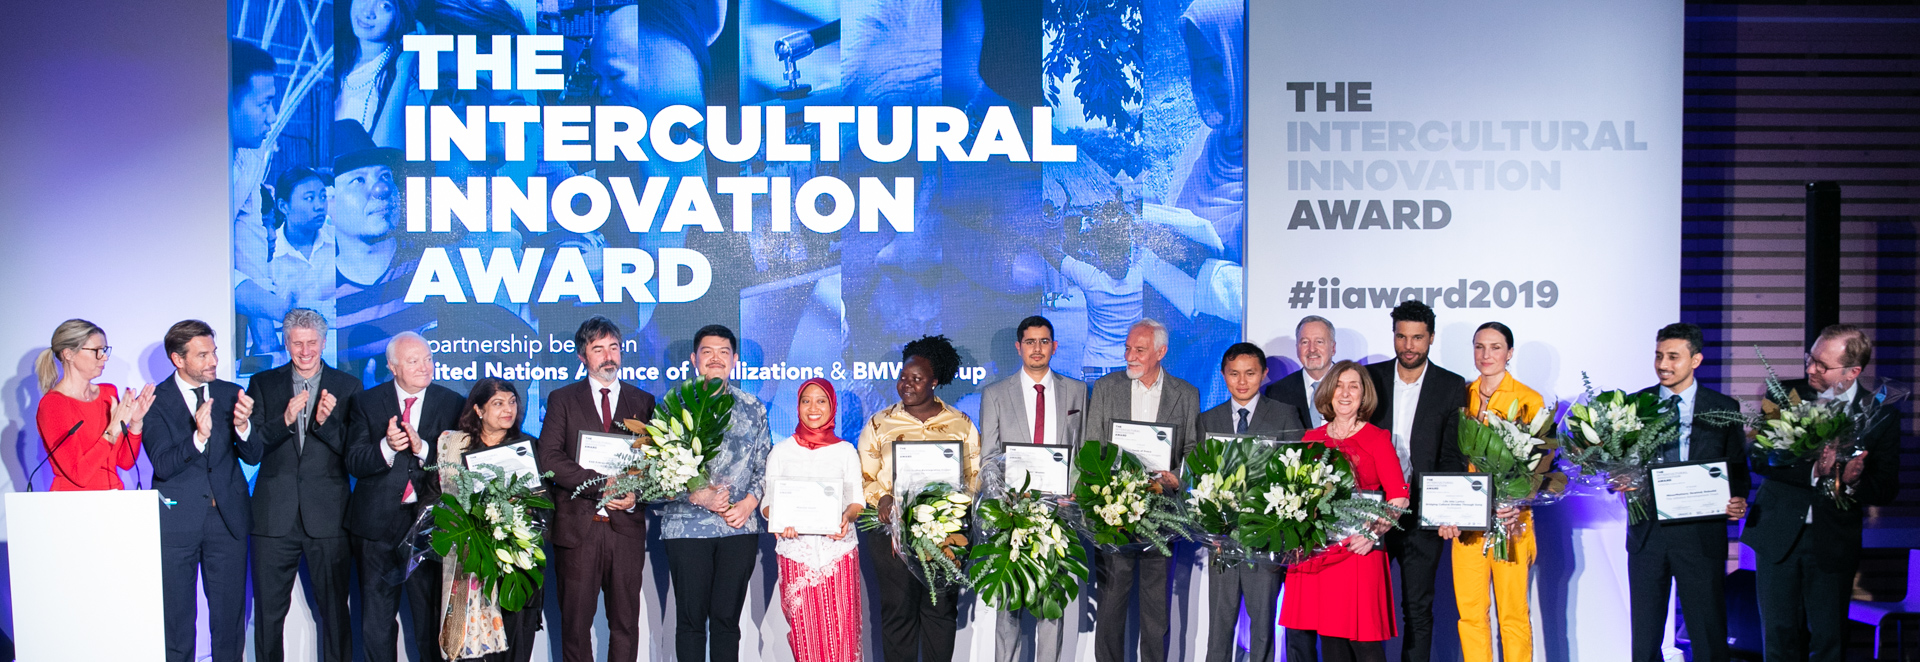 UNAOC and BMW Group Announce the 10 Finalists of the 2019 Intercultural Innovation Award